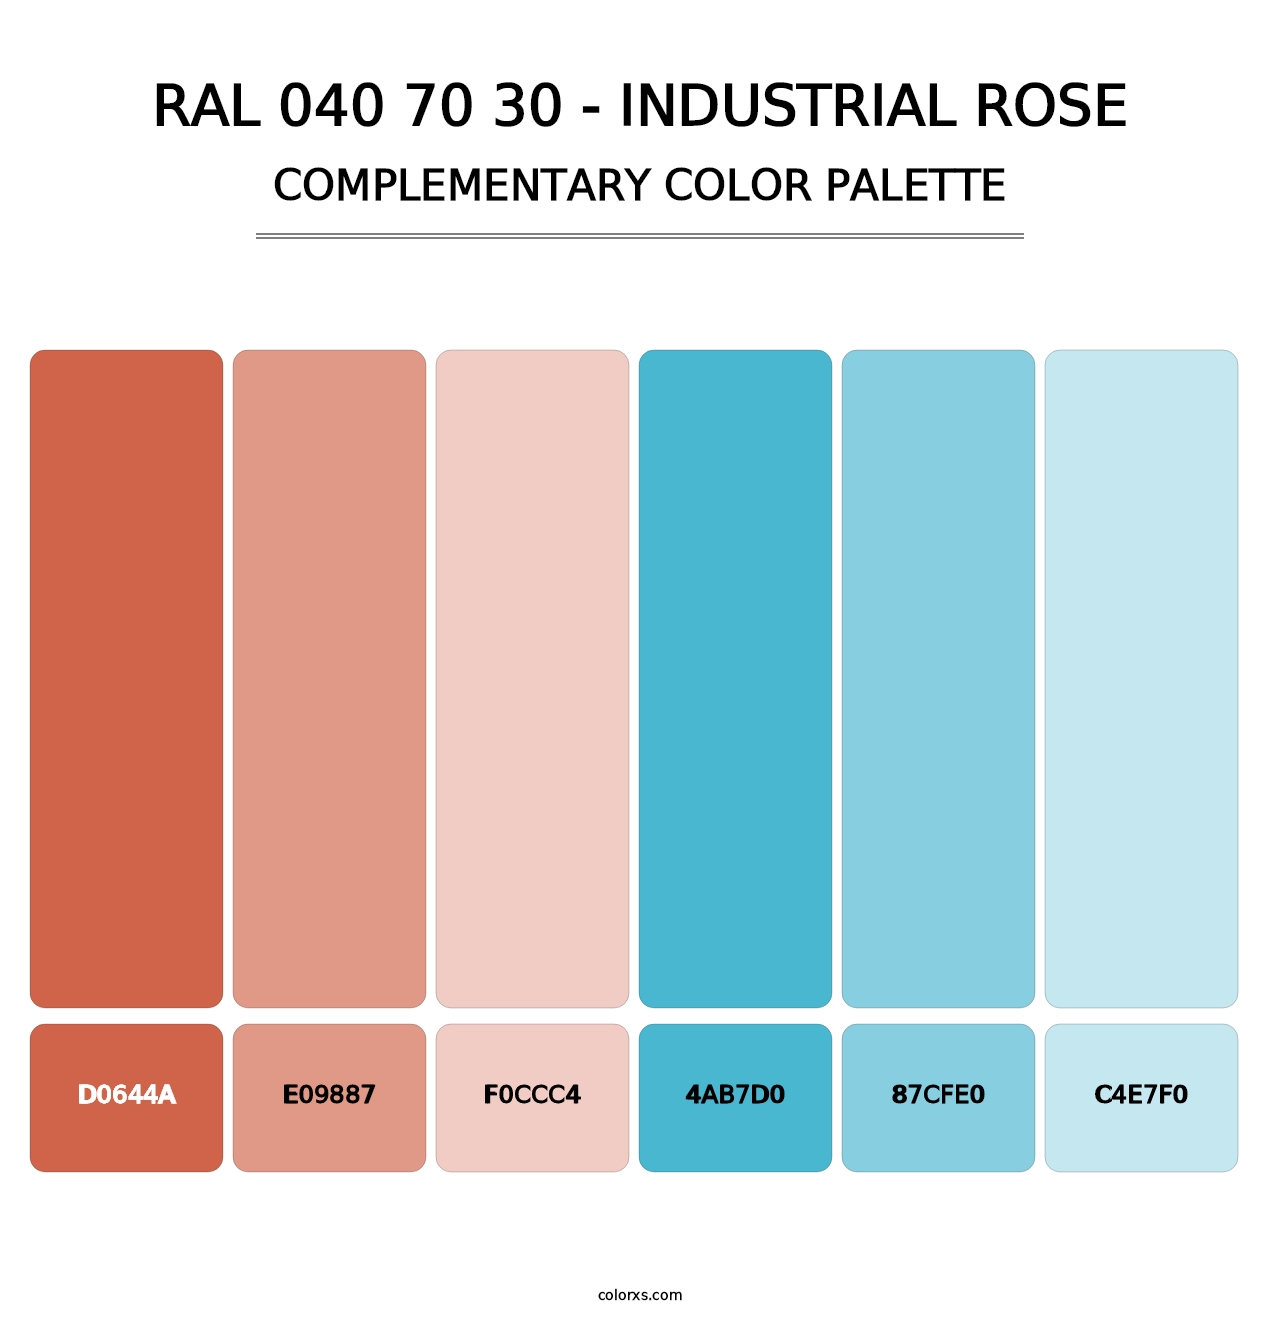 RAL 040 70 30 - Industrial Rose - Complementary Color Palette